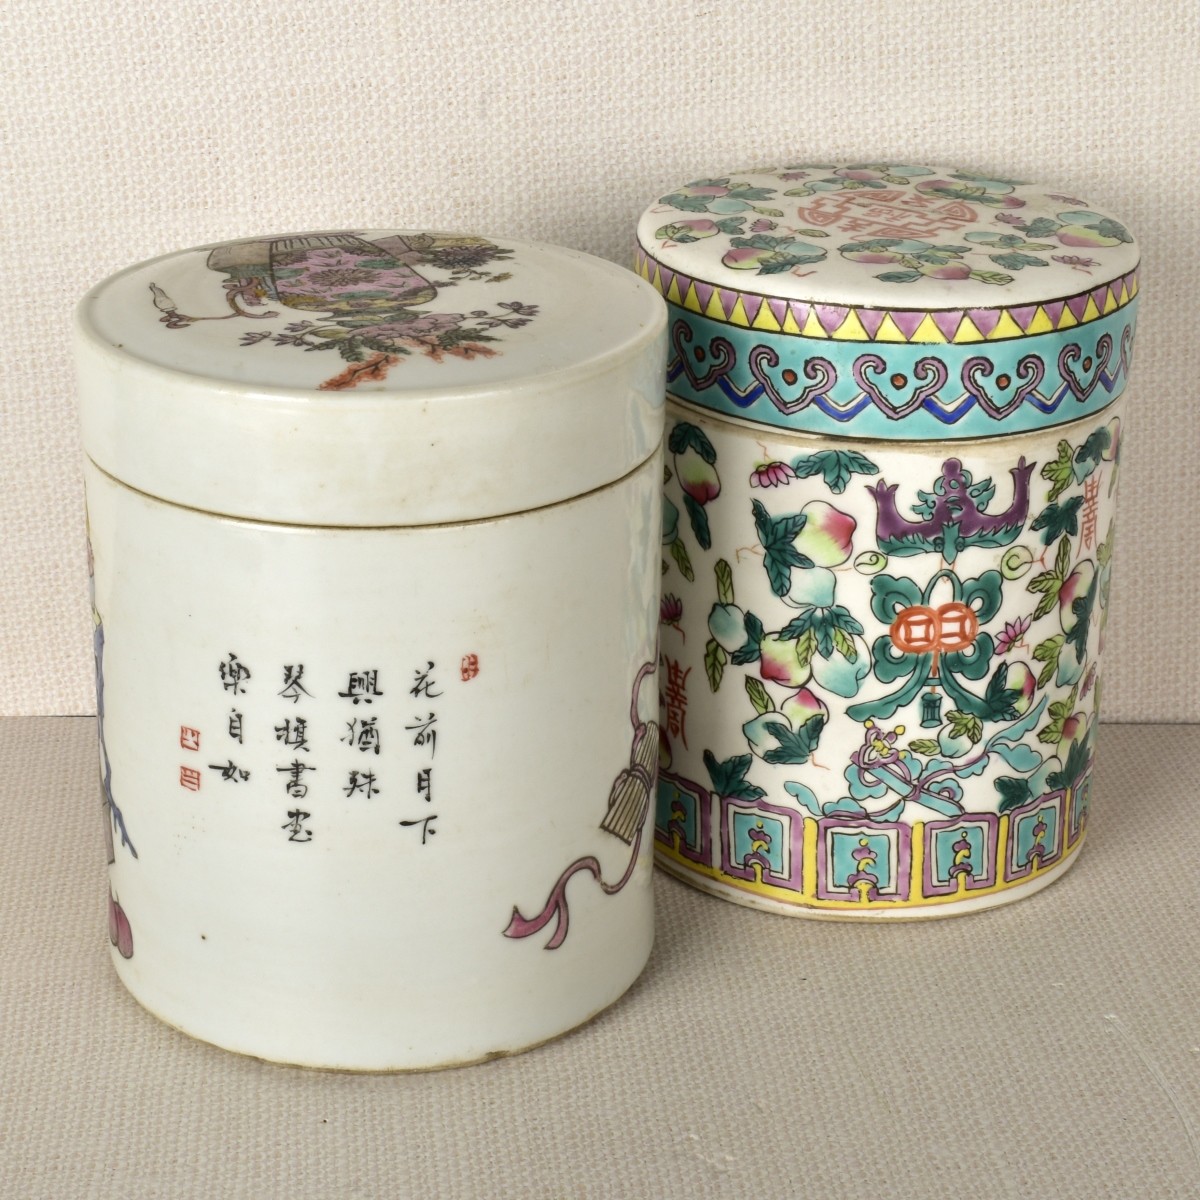 Chinese Porcelain Covered Jars